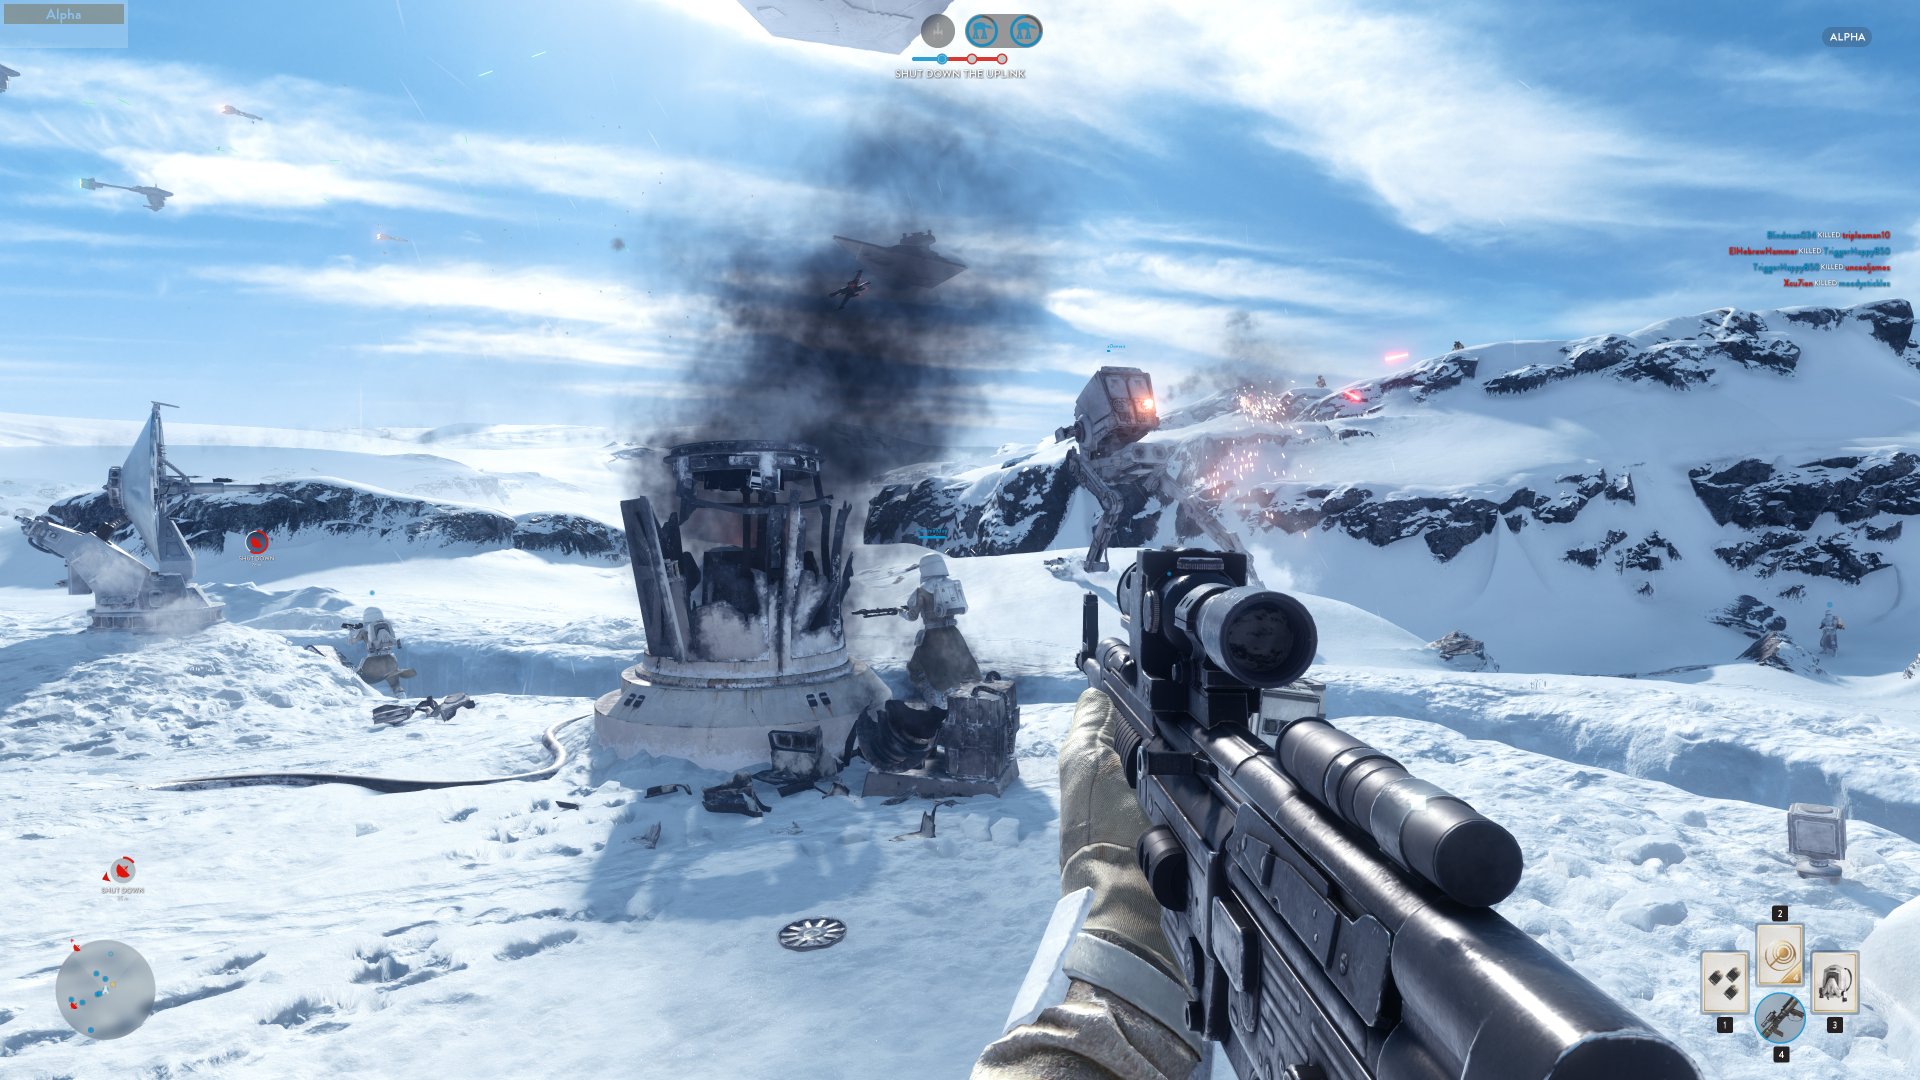 Co-Optimus - - Wars Battlefront Gets Screen on PS4 and Xbox One; Not for PC